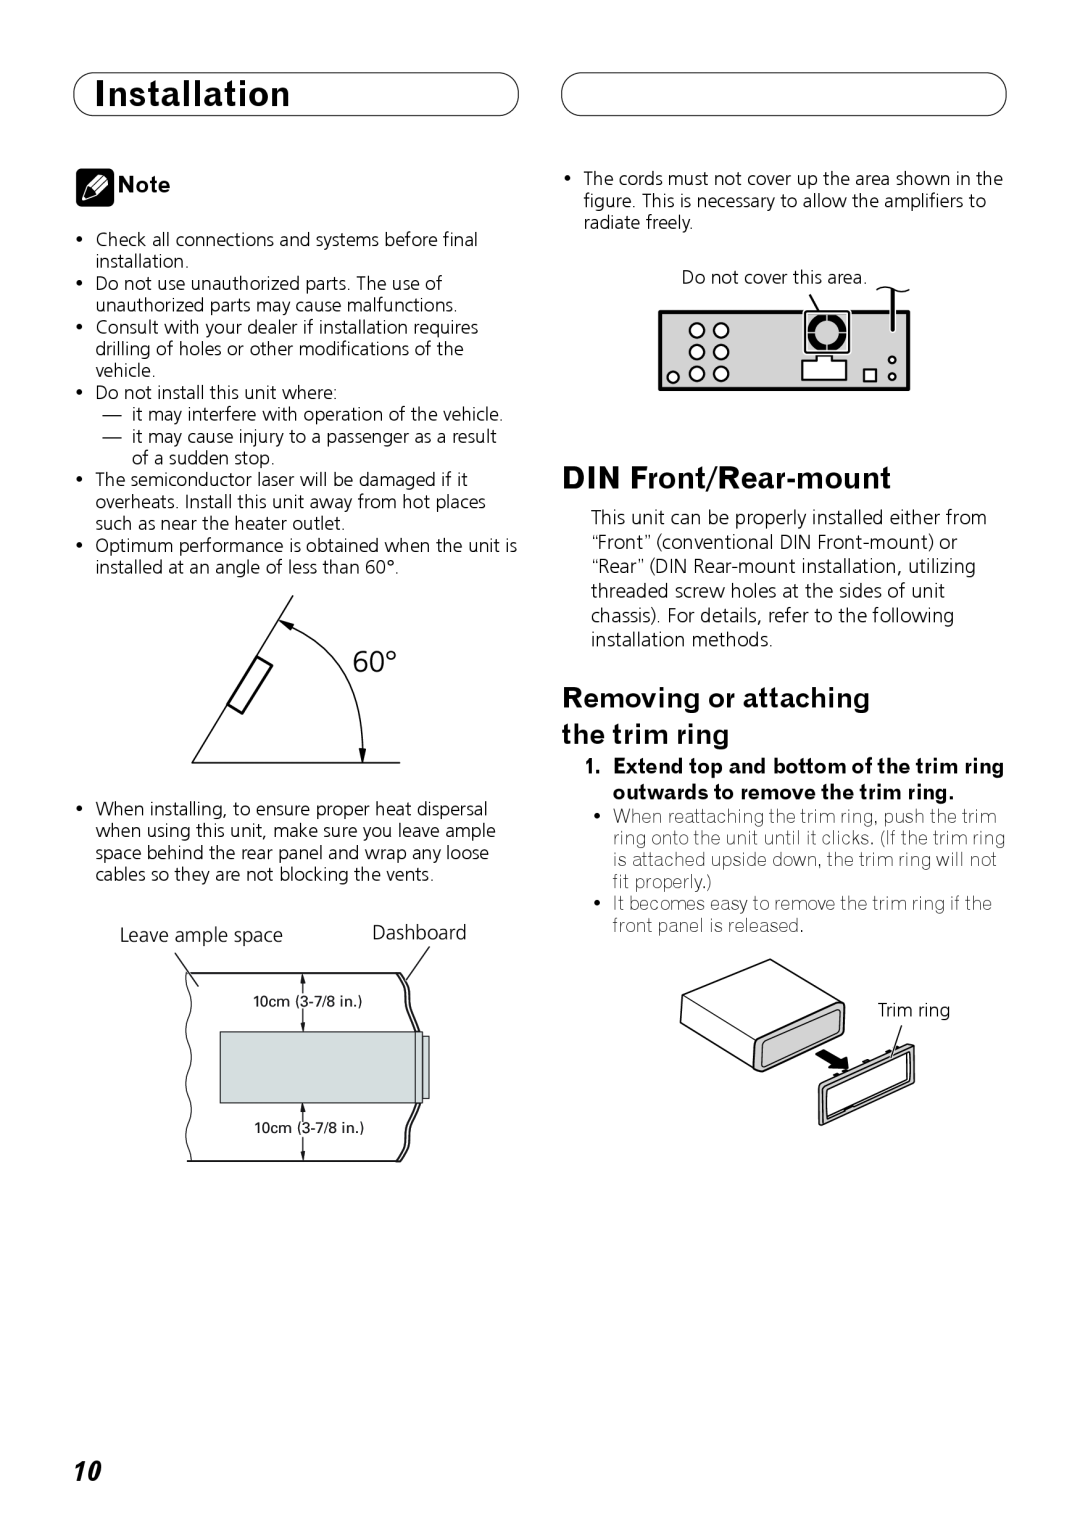 Pioneer DEH-P7100BT installation manual Installation, DIN Front/Rear-mount, Removing or attaching the trim ring 